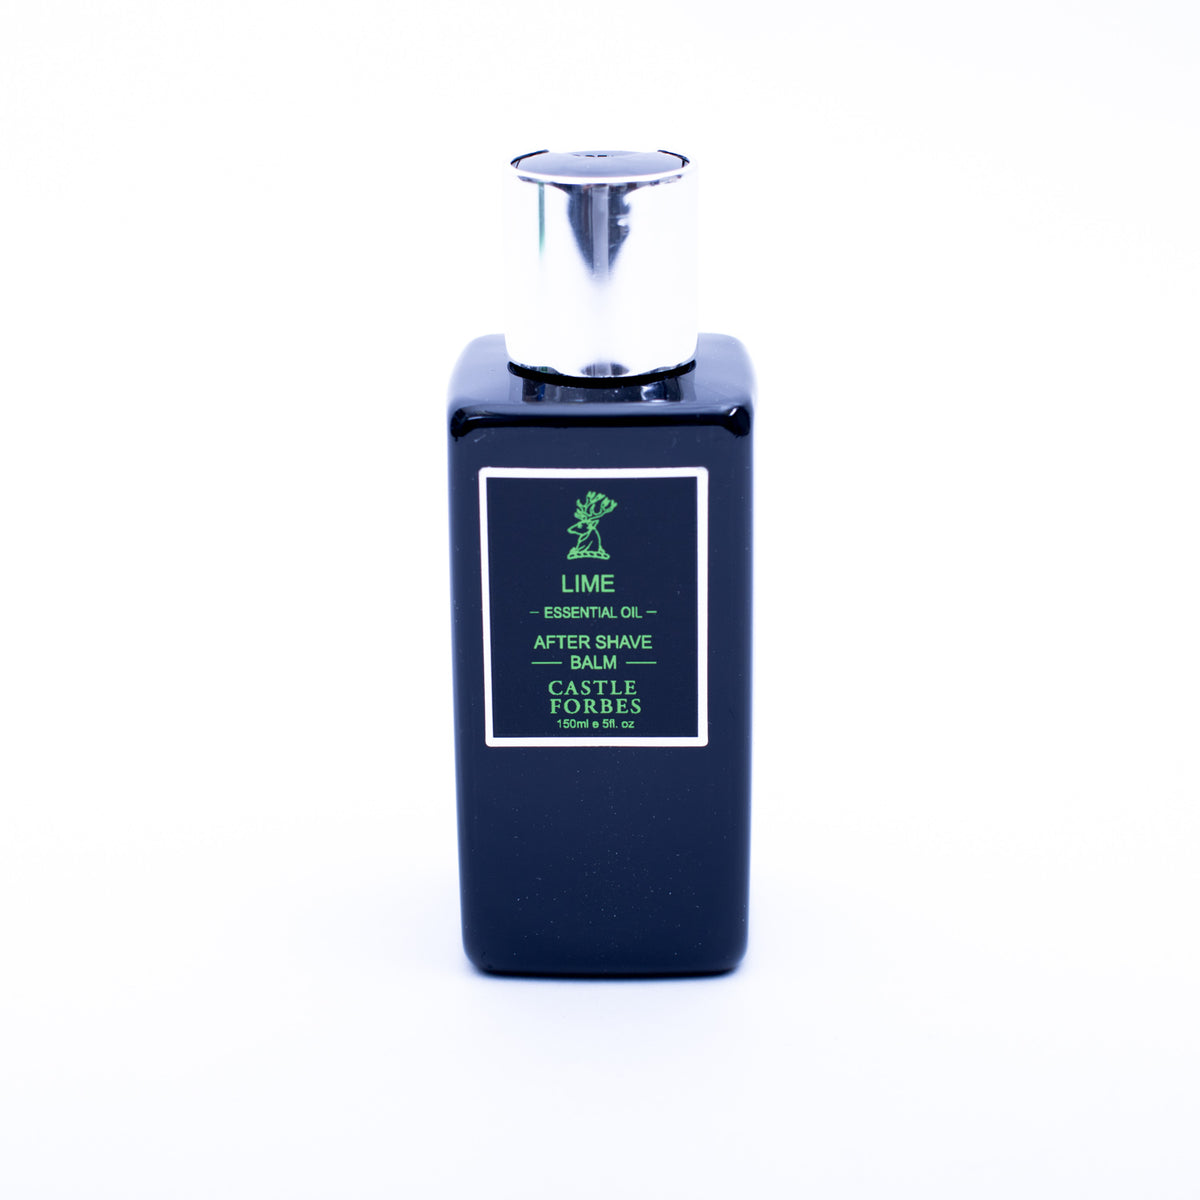 A black bottle of Castle Forbes Lime Essential Aftershave Balm by KirbyAllison.com on a white background.